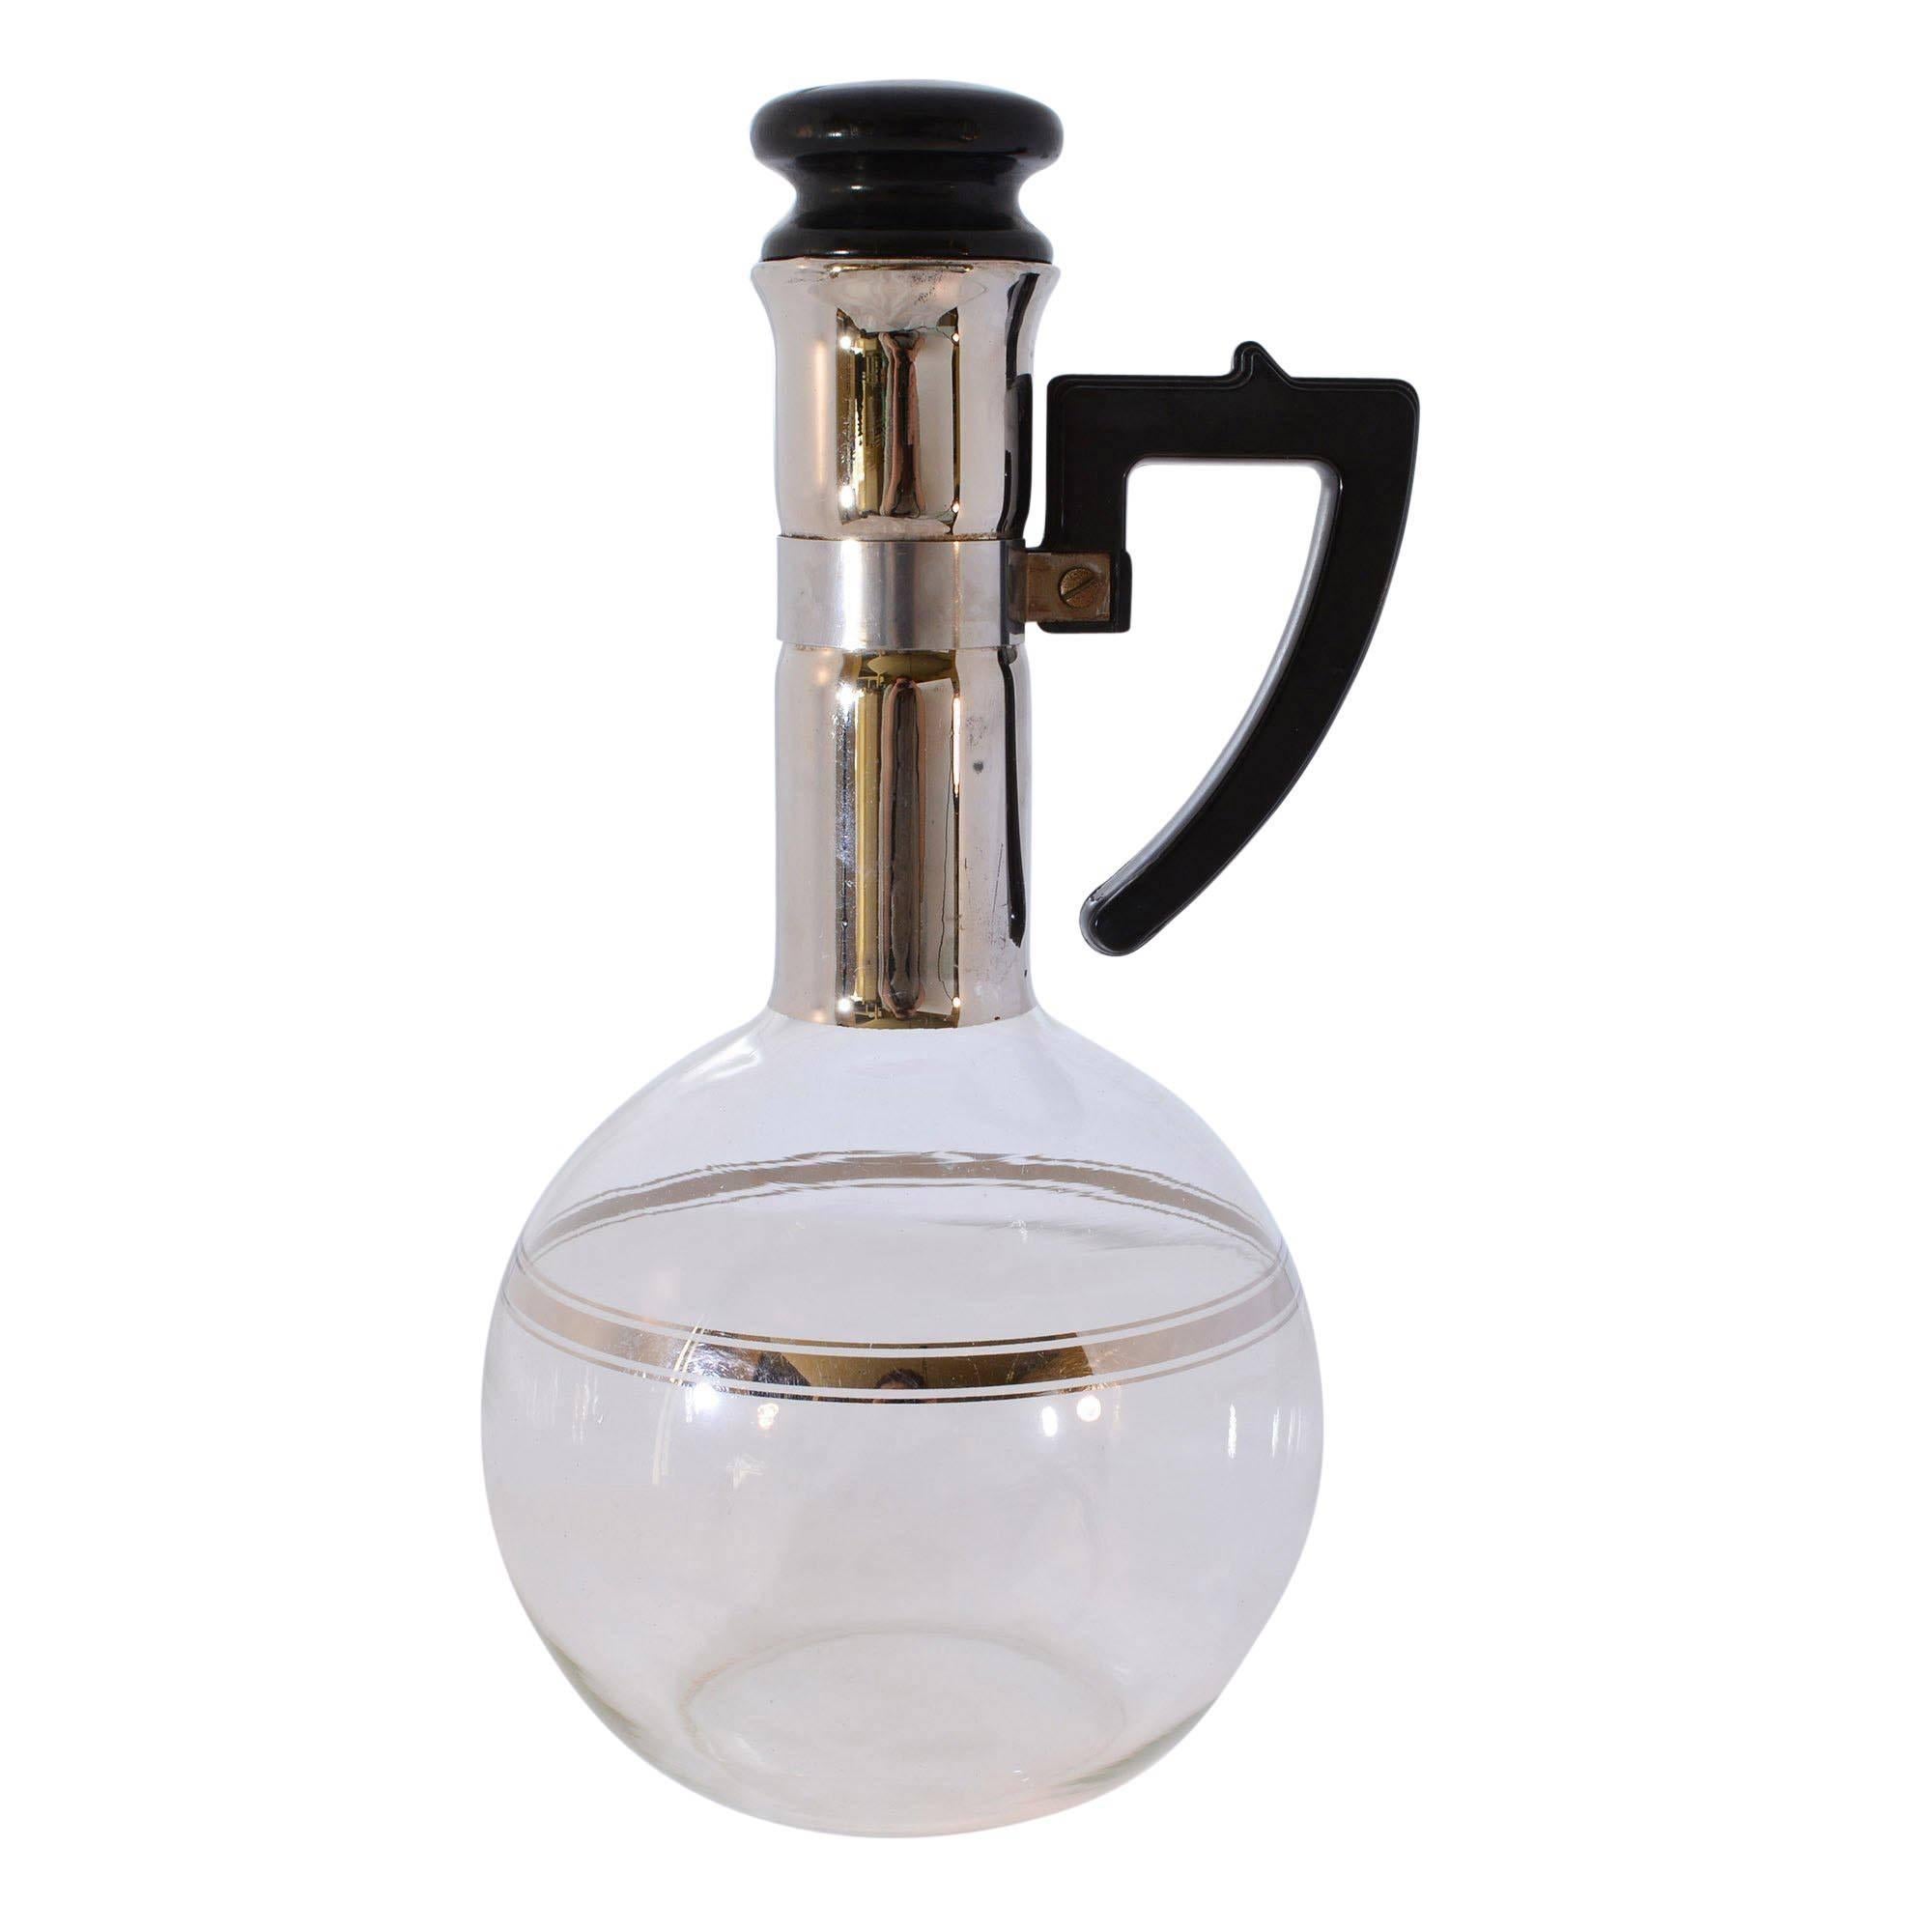 As an avid coffee drinker, this handblown Mid-Century Modern glass decanter caught my attention. What a striking vessel for coffee at a brunch. The long neck has a mirrored finish and is topped with a cork stopper. There is a patent number at the